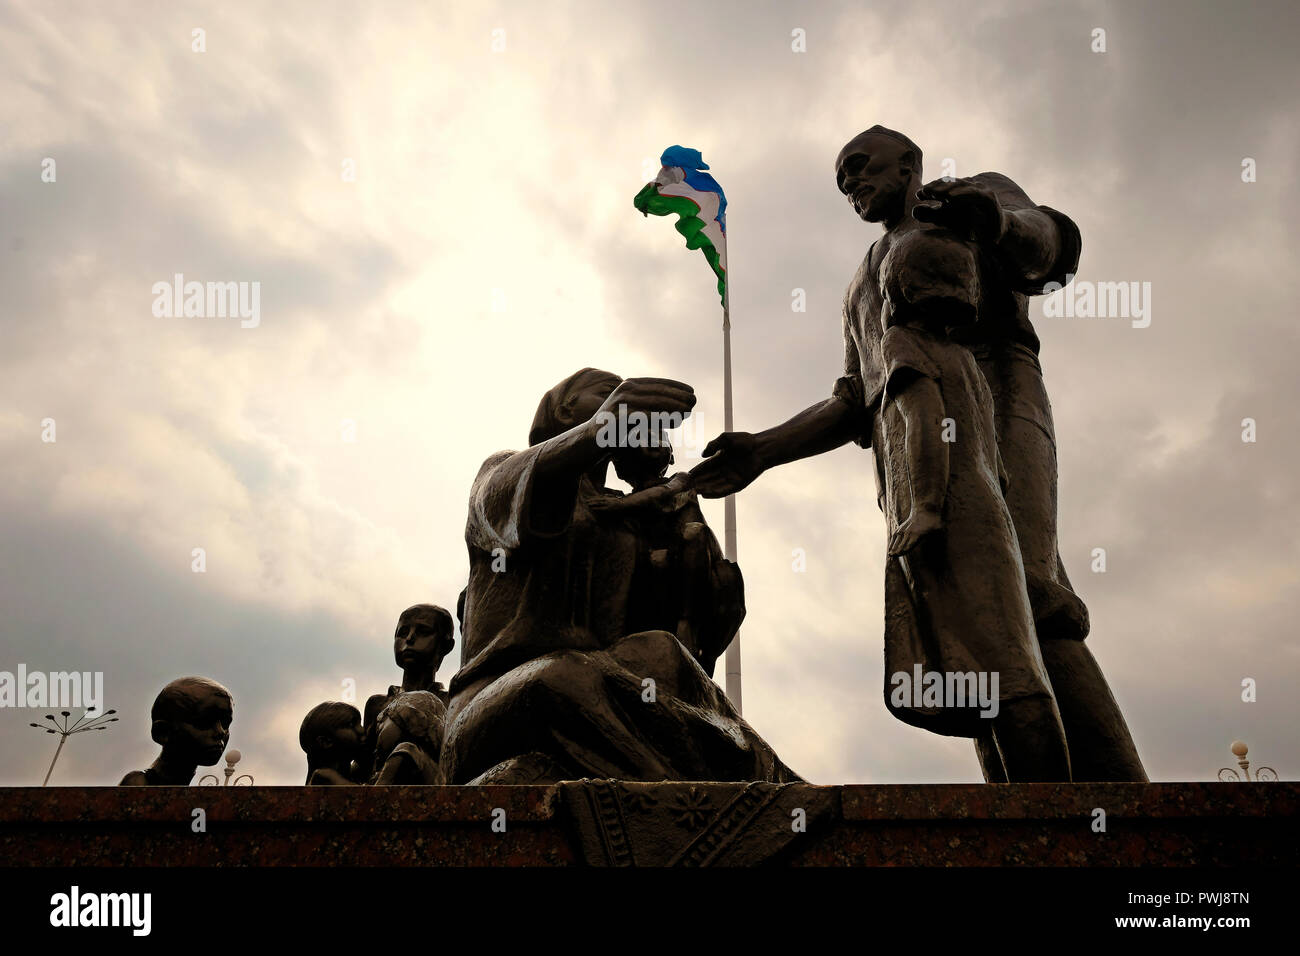 The Uzbek national flag flutters over a Soviet-era monument (created by sculptor Dmitry Ryabichev in 1982) to the blacksmith Shaakhmed Shamakhmudov and his wife Bahri Akramova who adopted 15 children of different nationalities, who lost their parents and were evacuated to Tashkent during WWII placed at the Park of Amity in Tashkent, capital of Uzbekistan. During Second World War more than one million evacuees, including more than 200,000 children who had lost their parents, were moved to Uzbekistan. Every day, between 200 and 400 orphans arrived at Tashkent railway station. Stock Photo